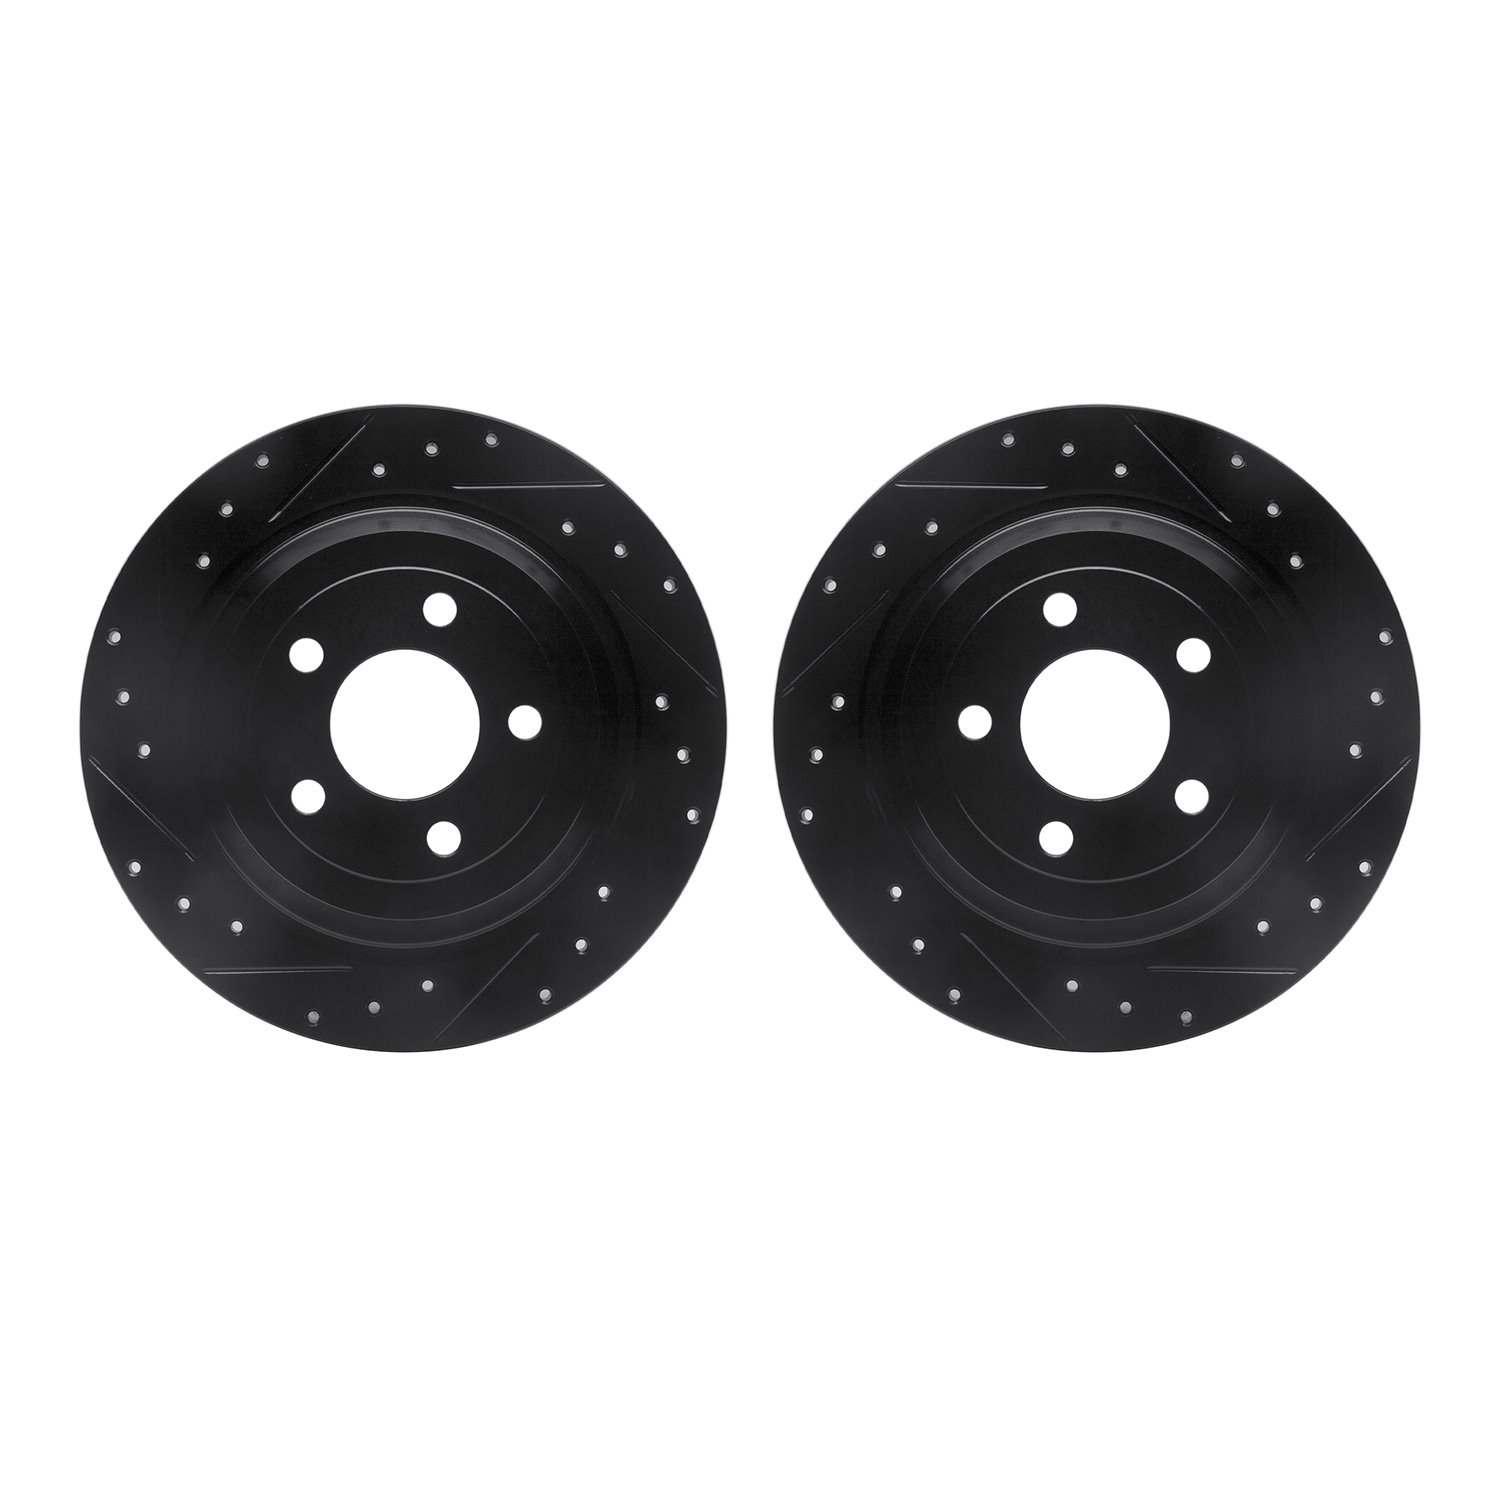 8002-54242 Drilled/Slotted Brake Rotors [Black], Fits Select Ford/Lincoln/Mercury/Mazda, Position: Rear